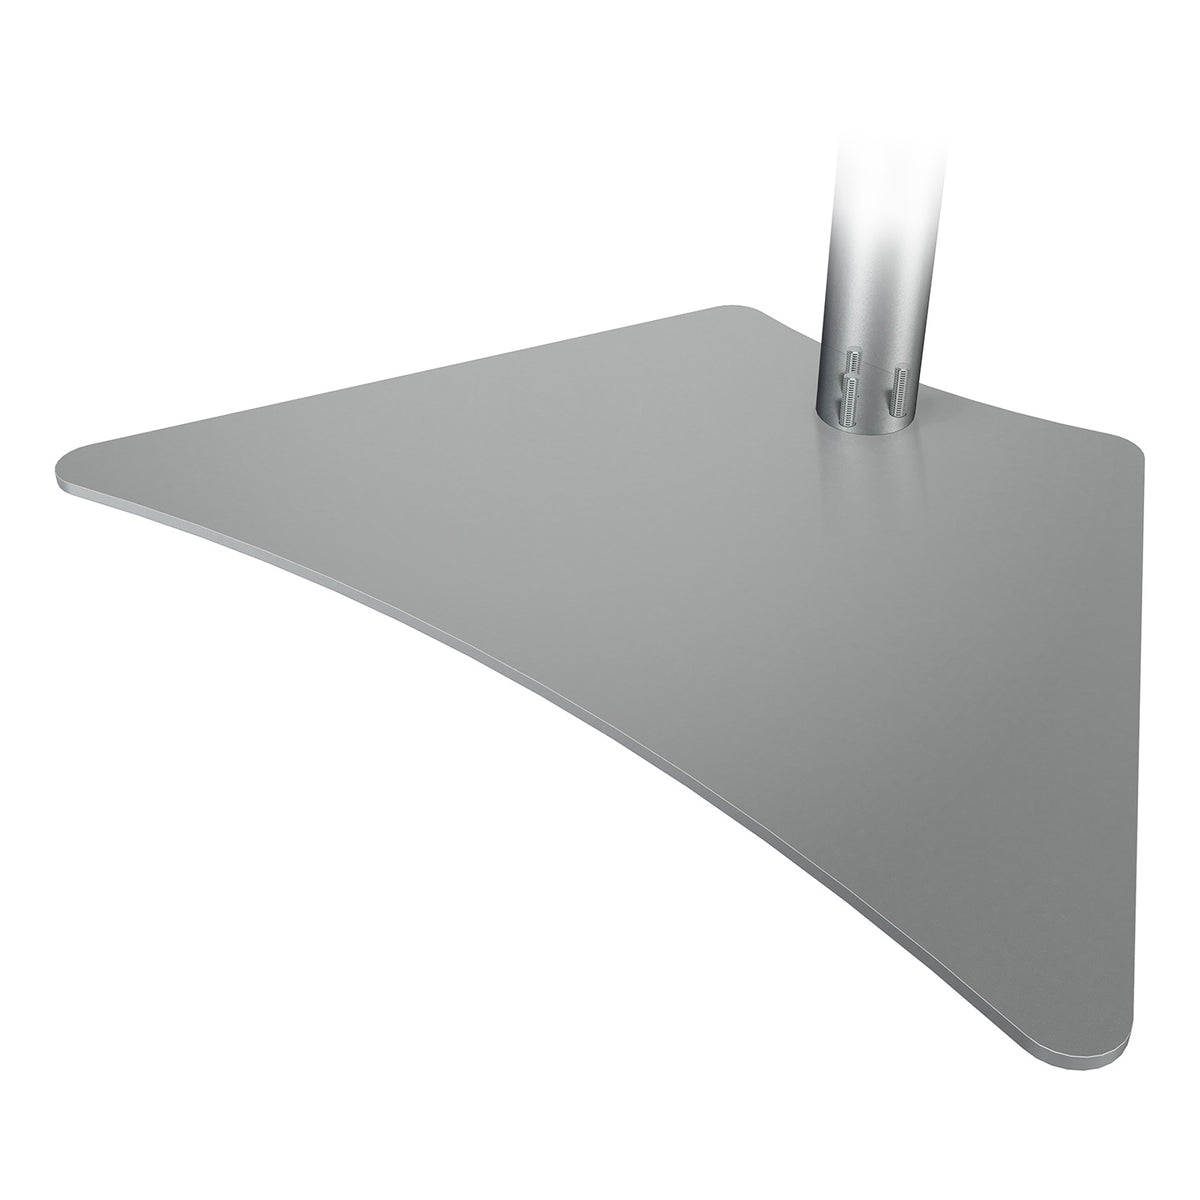 Viewmate desk plate - option 912